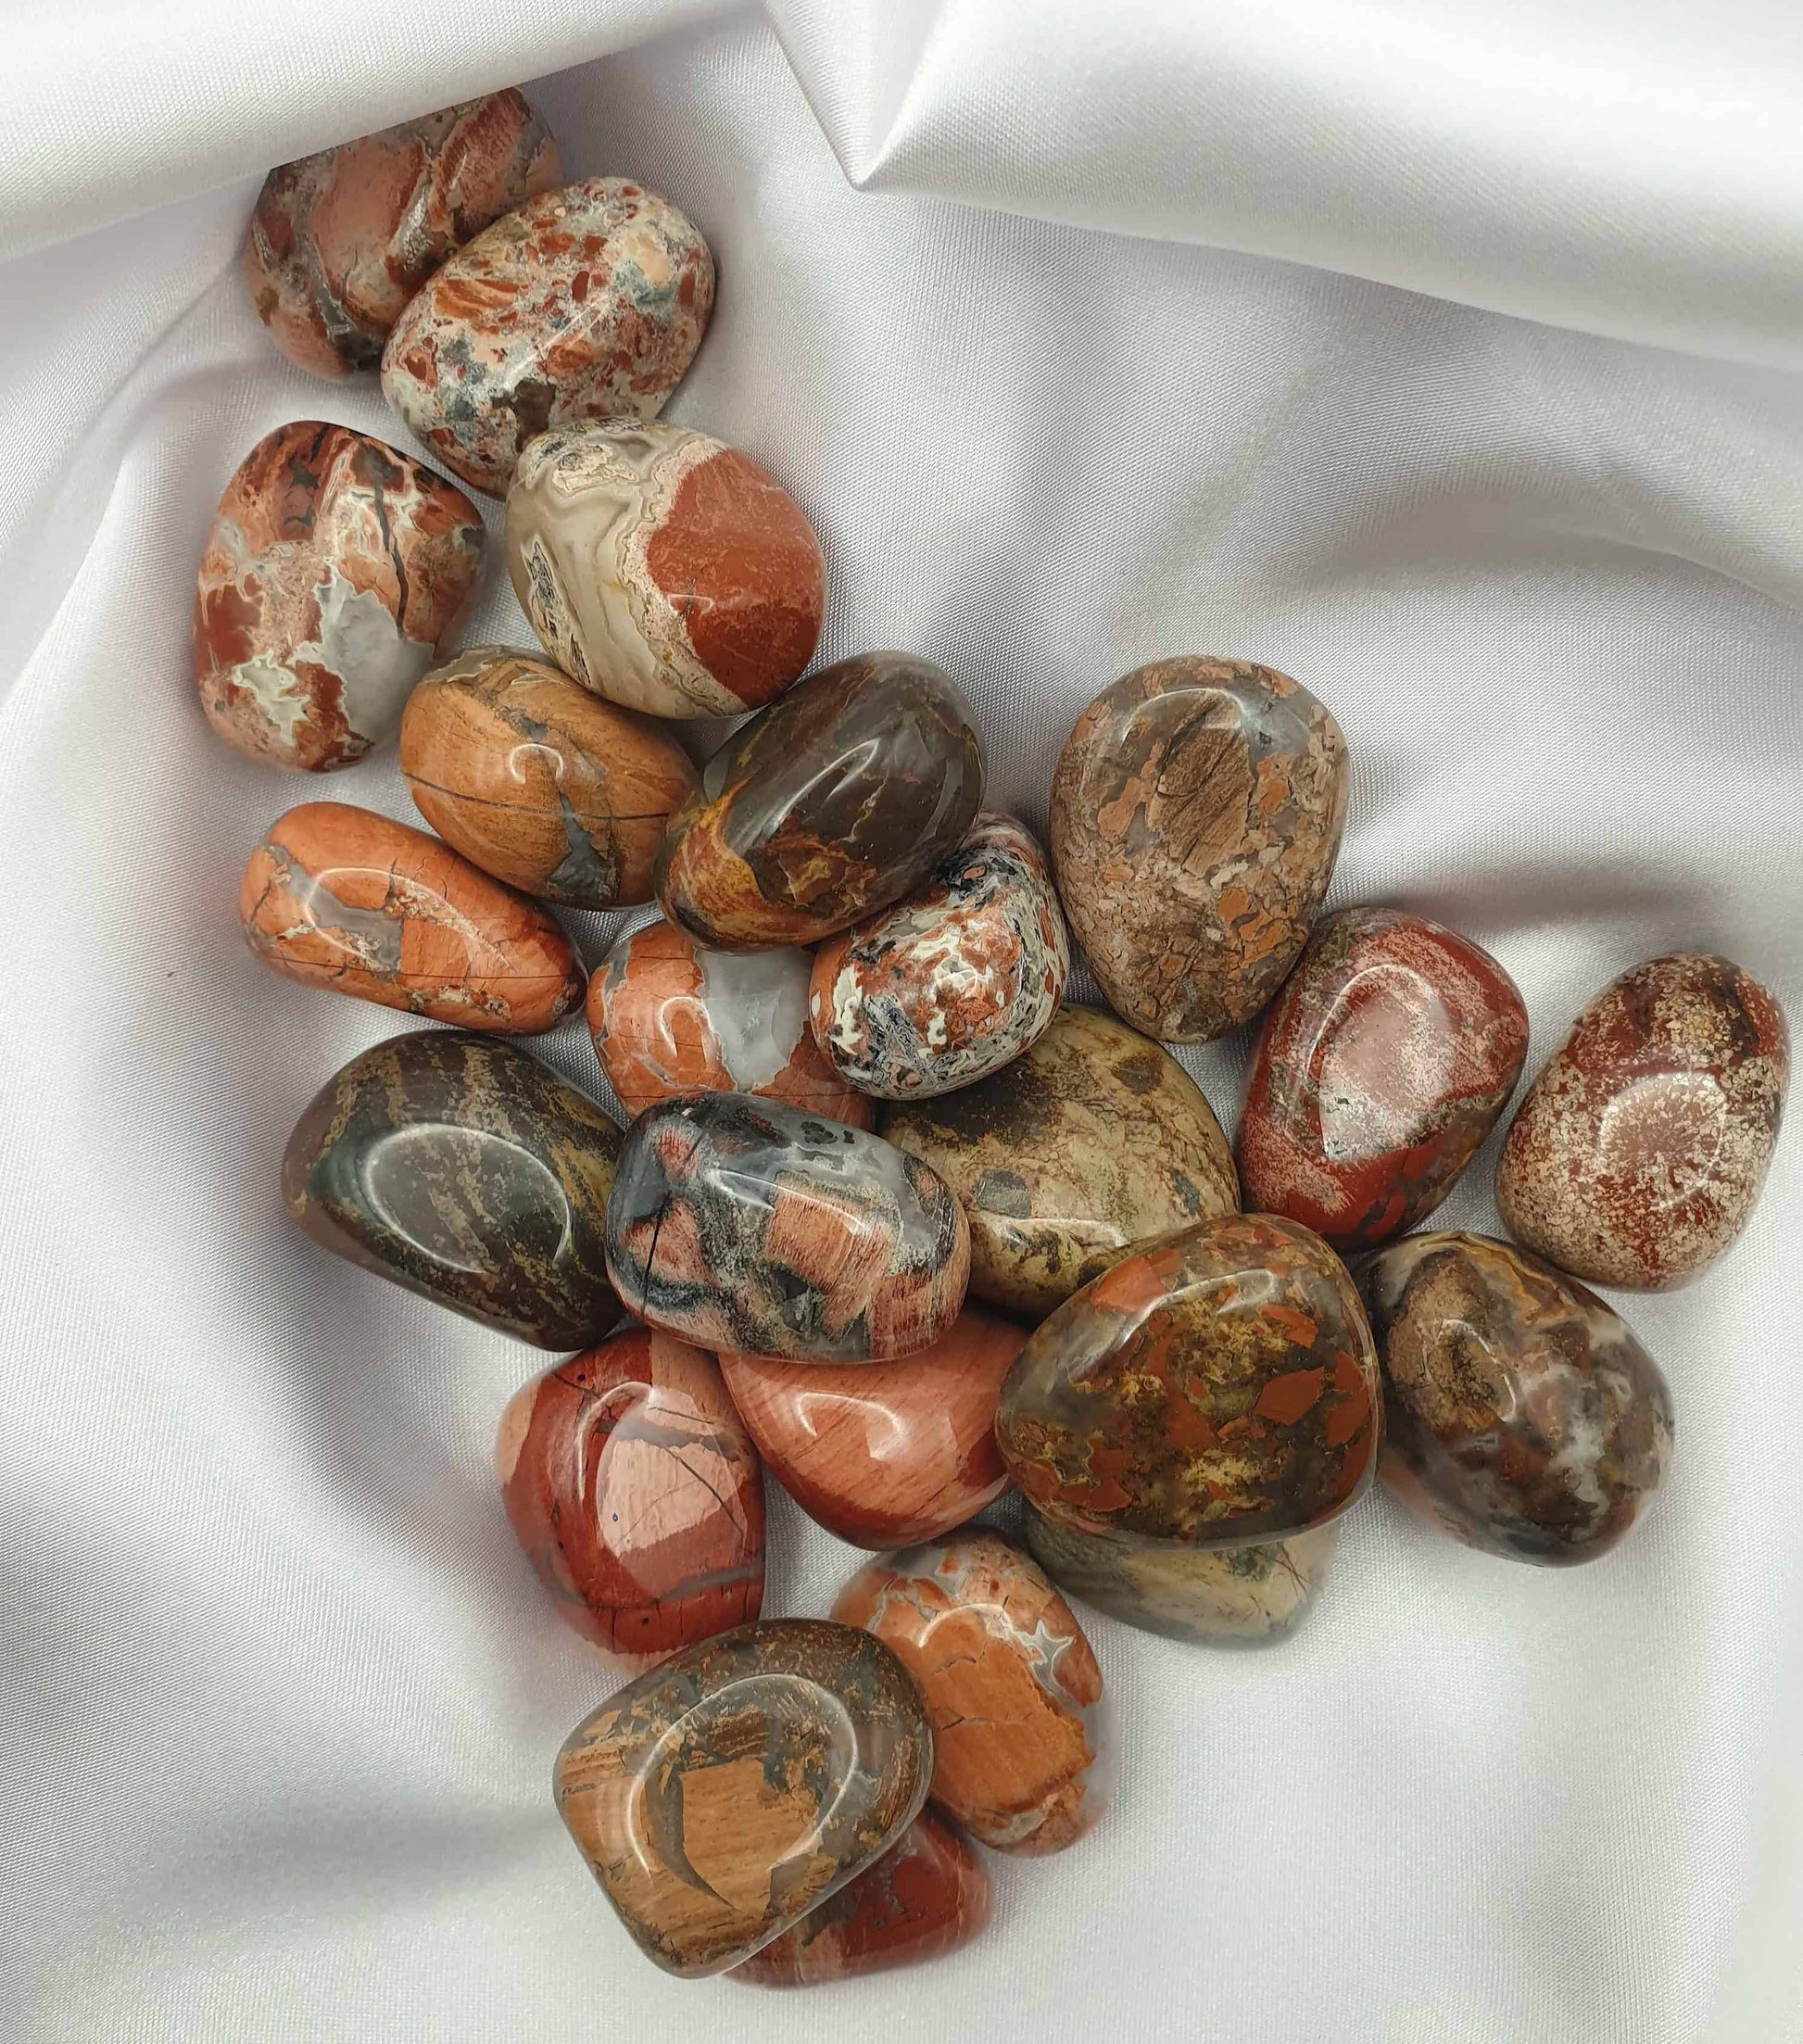 Poppy Jasper is a great grounding, revitalising, all purpose stone which can help to stimulate energy, mental activity and motivation. Poppy Jasper tumbled stones can assist in balancing the yin and yang and the patterns are amazing!